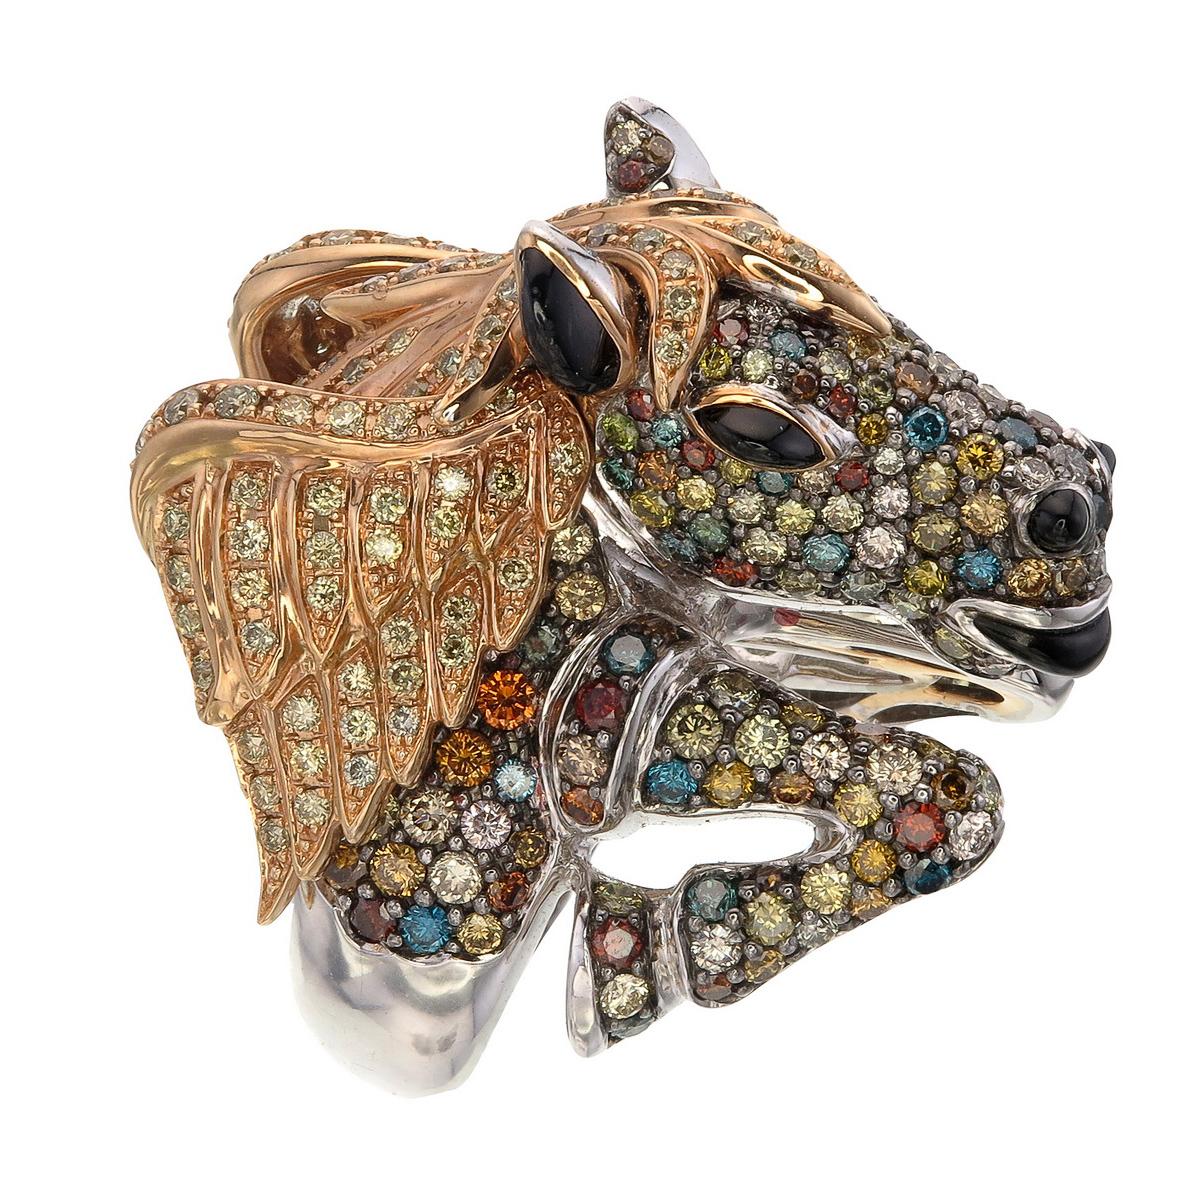 Sauvage Collection- One of a kind Piece.
Introducing the majestic ring, a captivating masterpiece of artistry. This extraordinary ring features a magnificent horse-shaped design meticulously crafted with great care and attention. The centerpiece